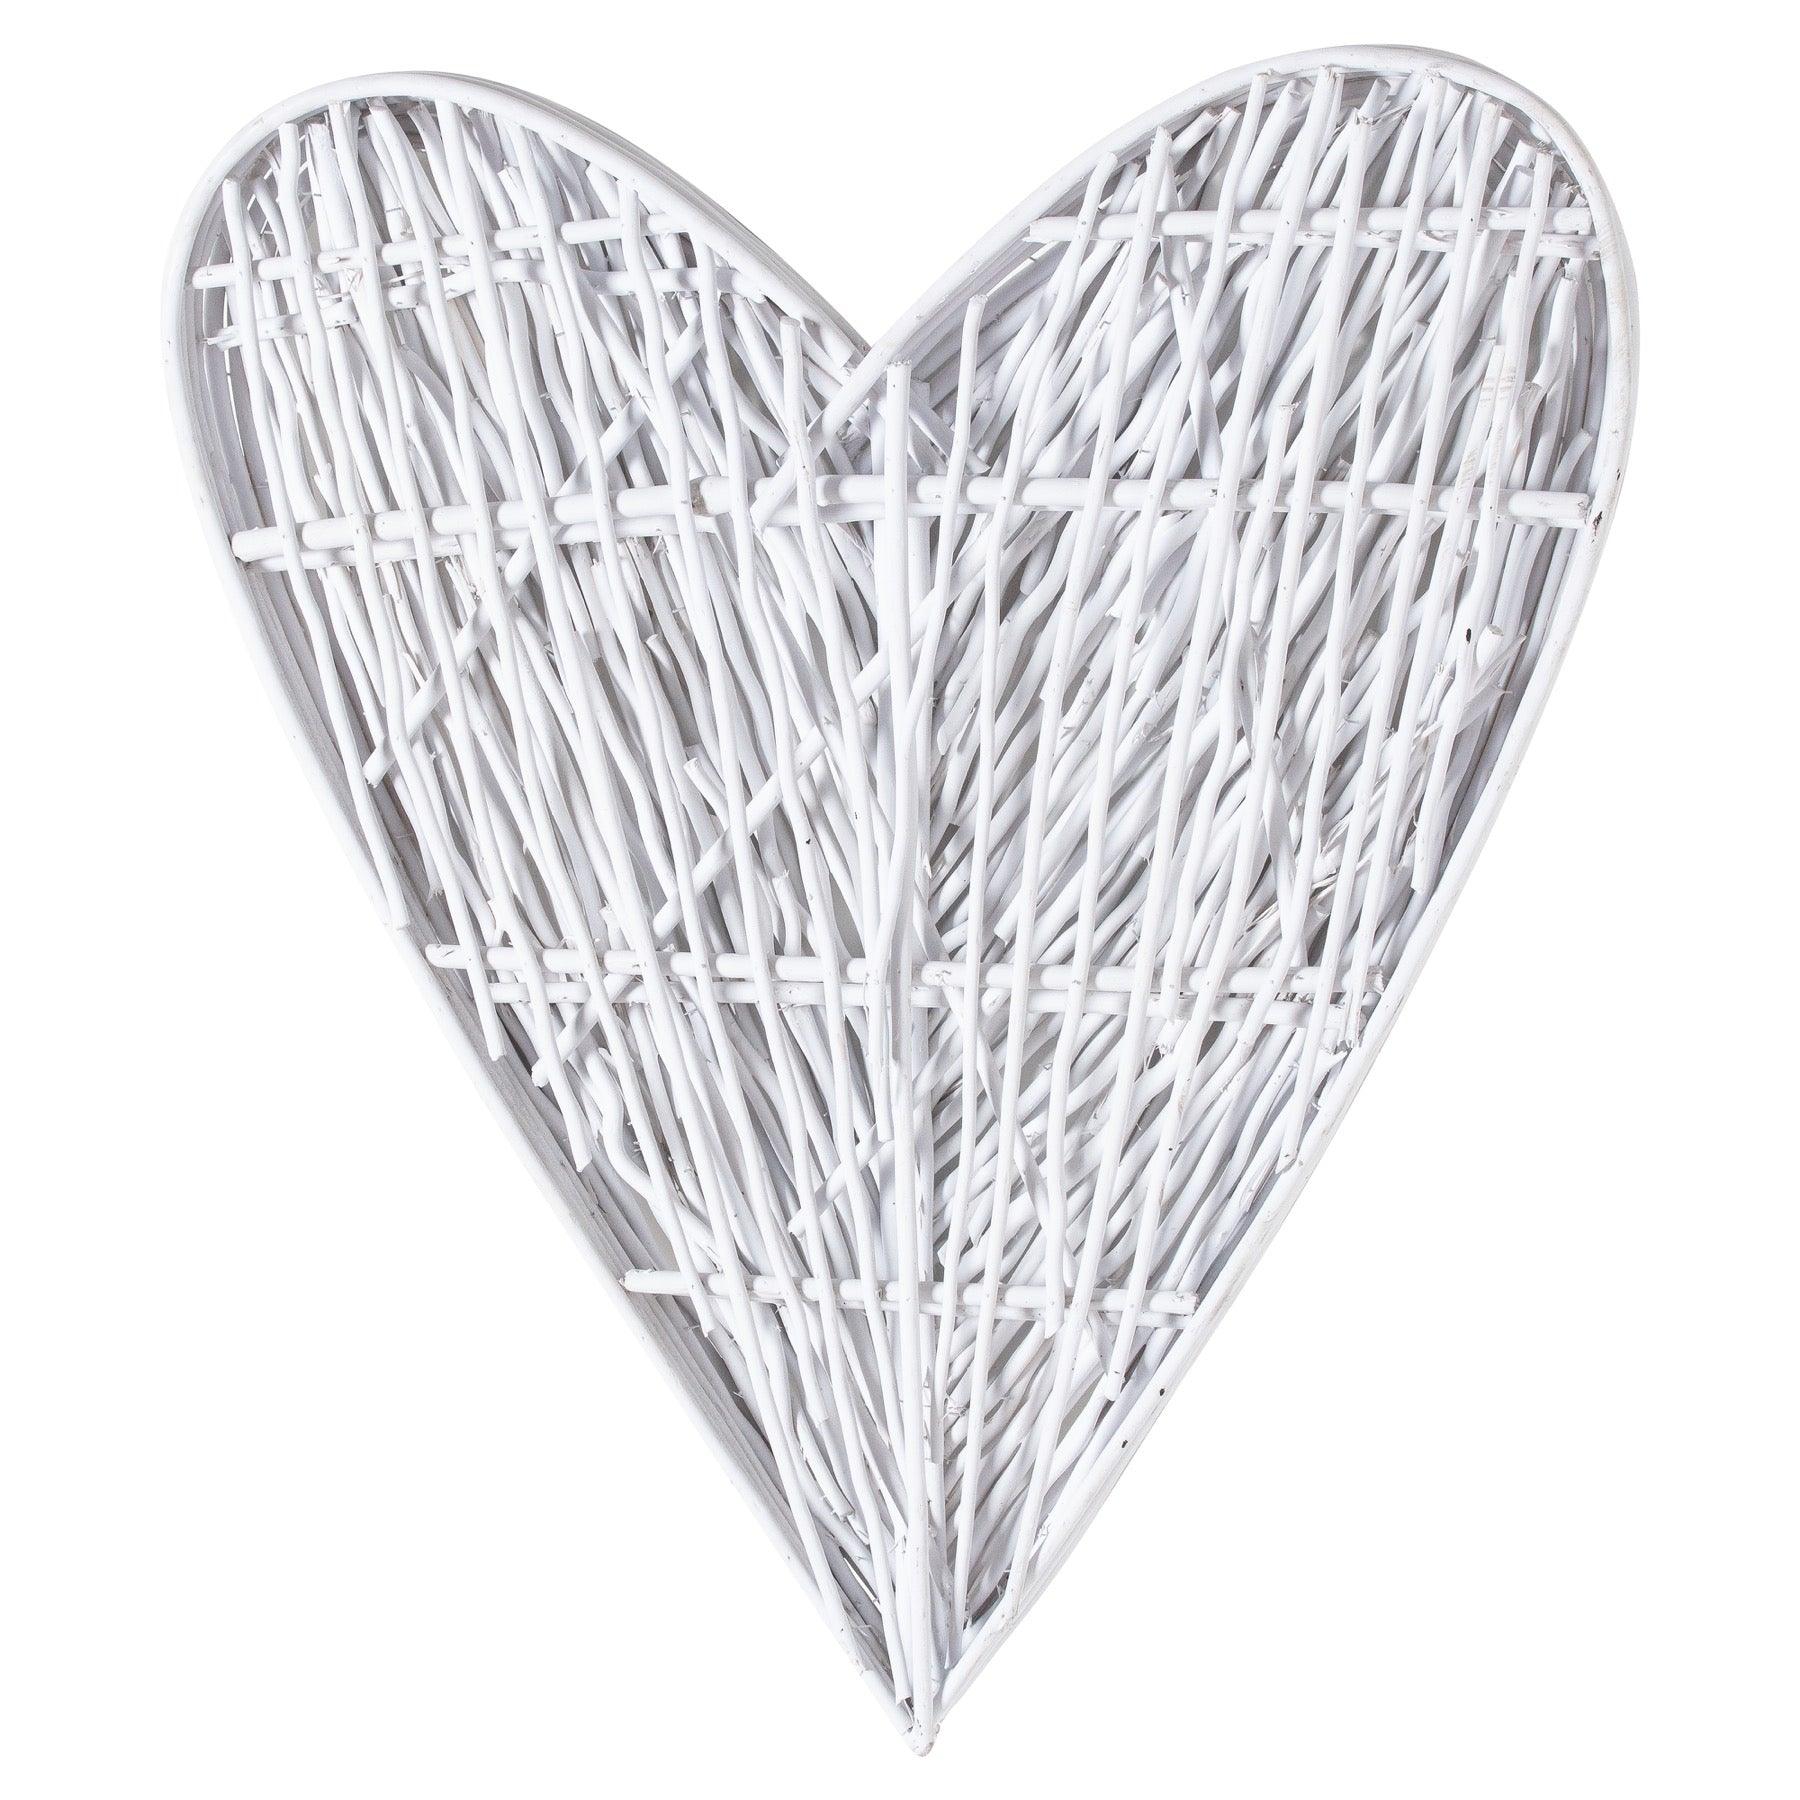 White Willow Branch Heart - Vookoo Lifestyle